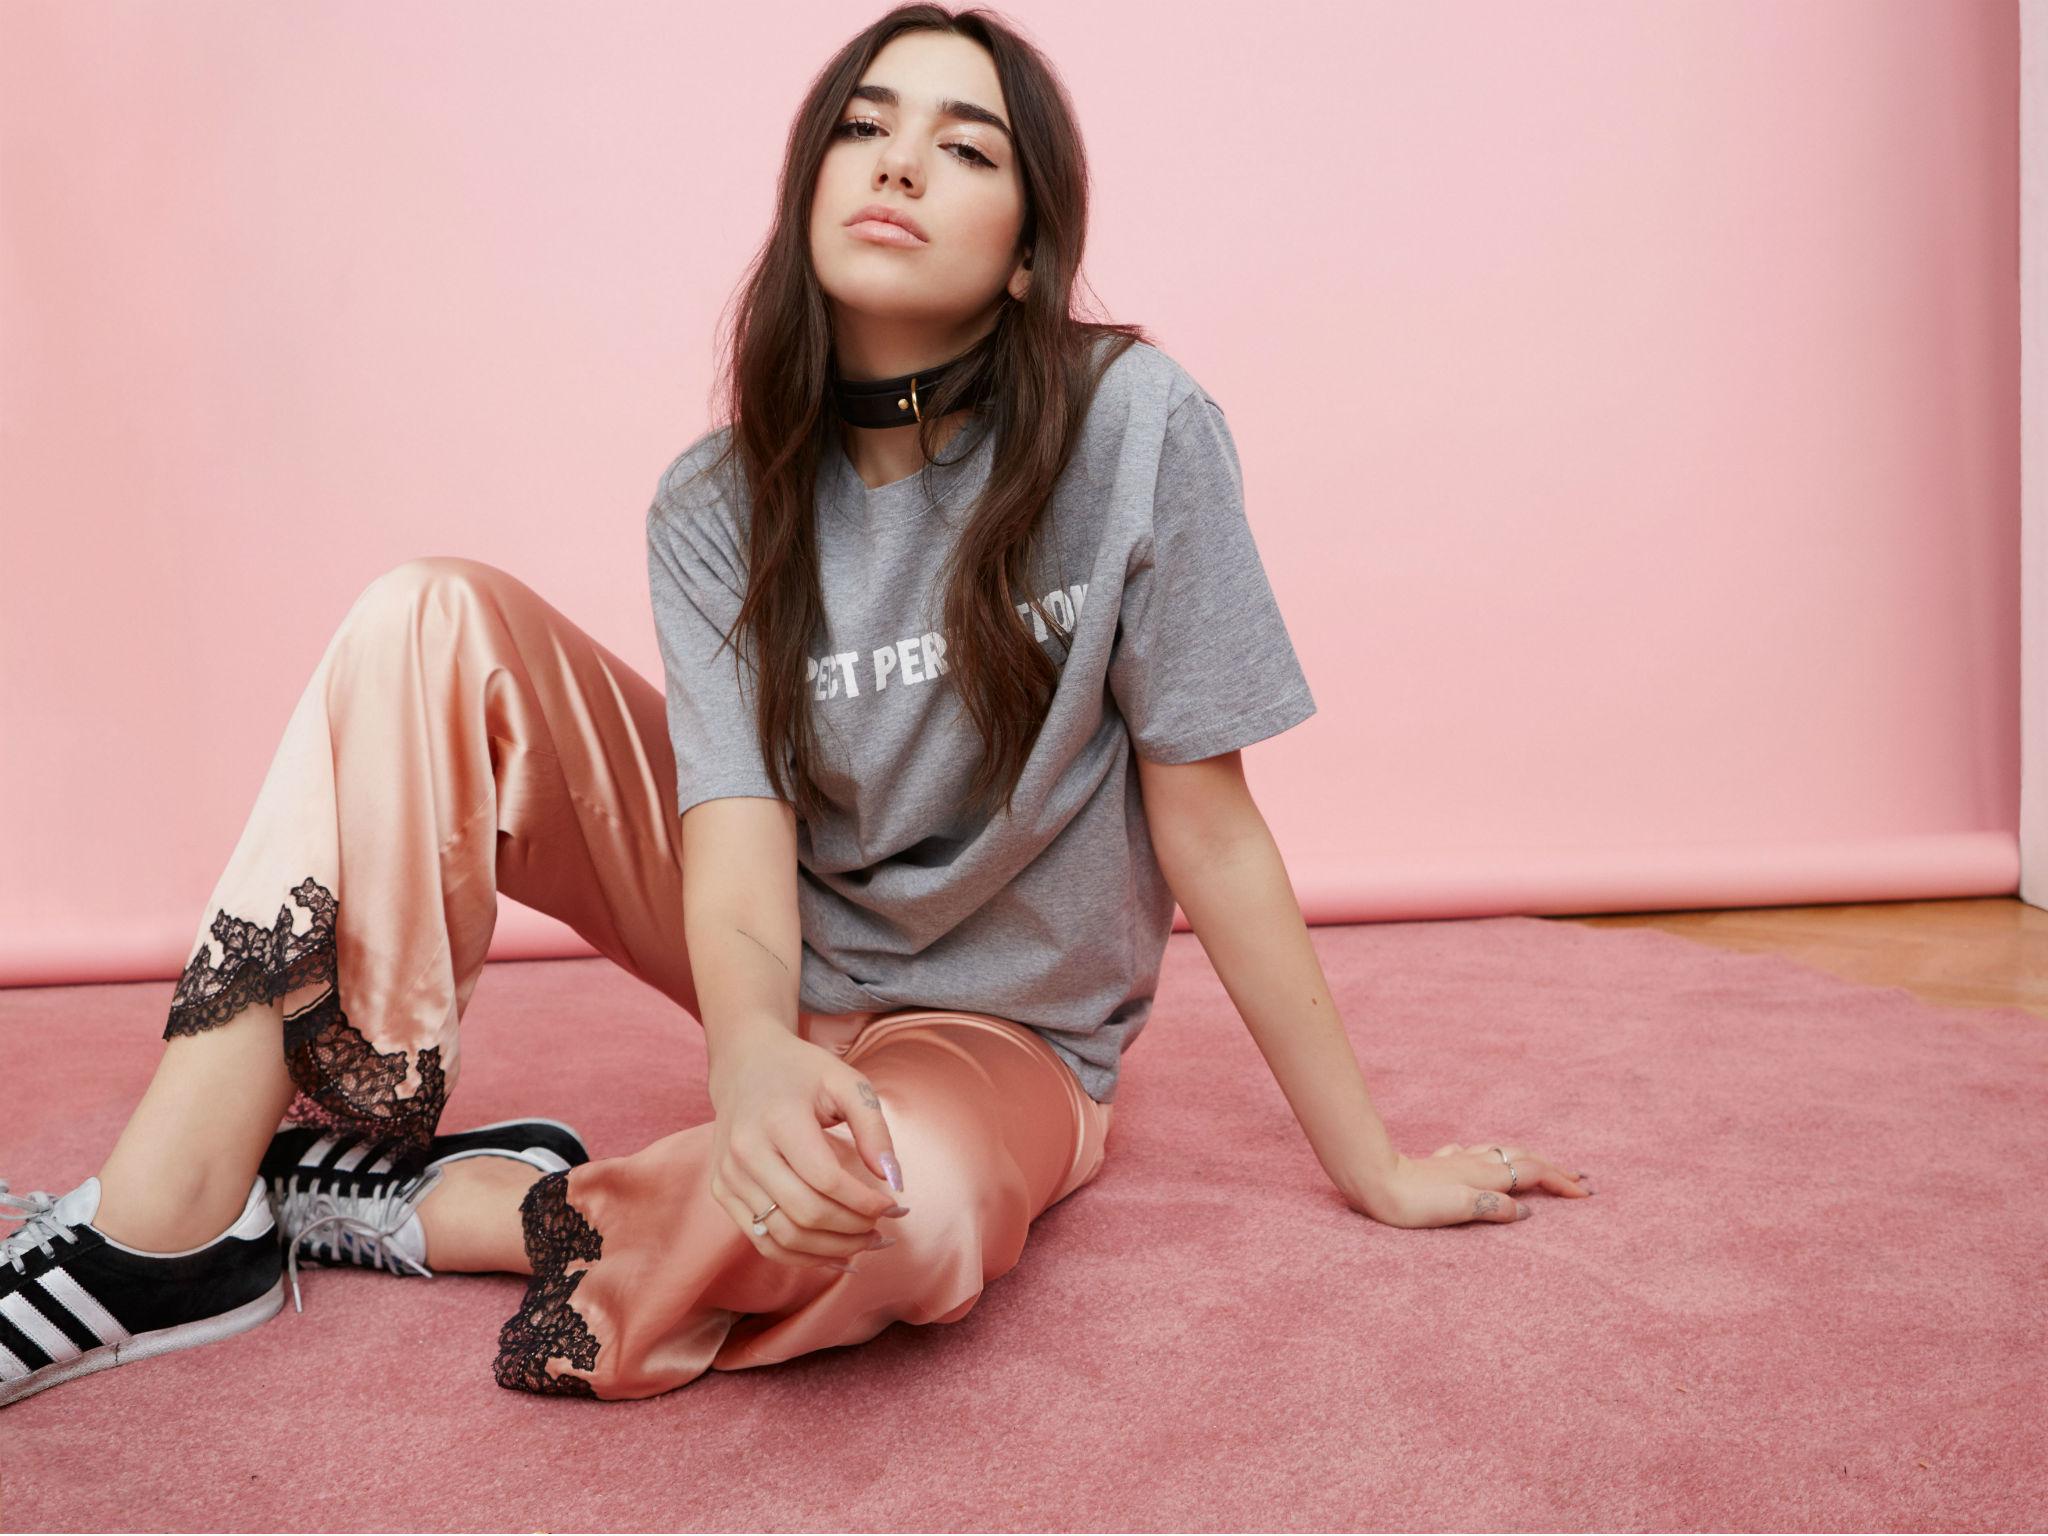 Newcomer Dua Lipa has stormed the charts recently with songs including 'Be The One'